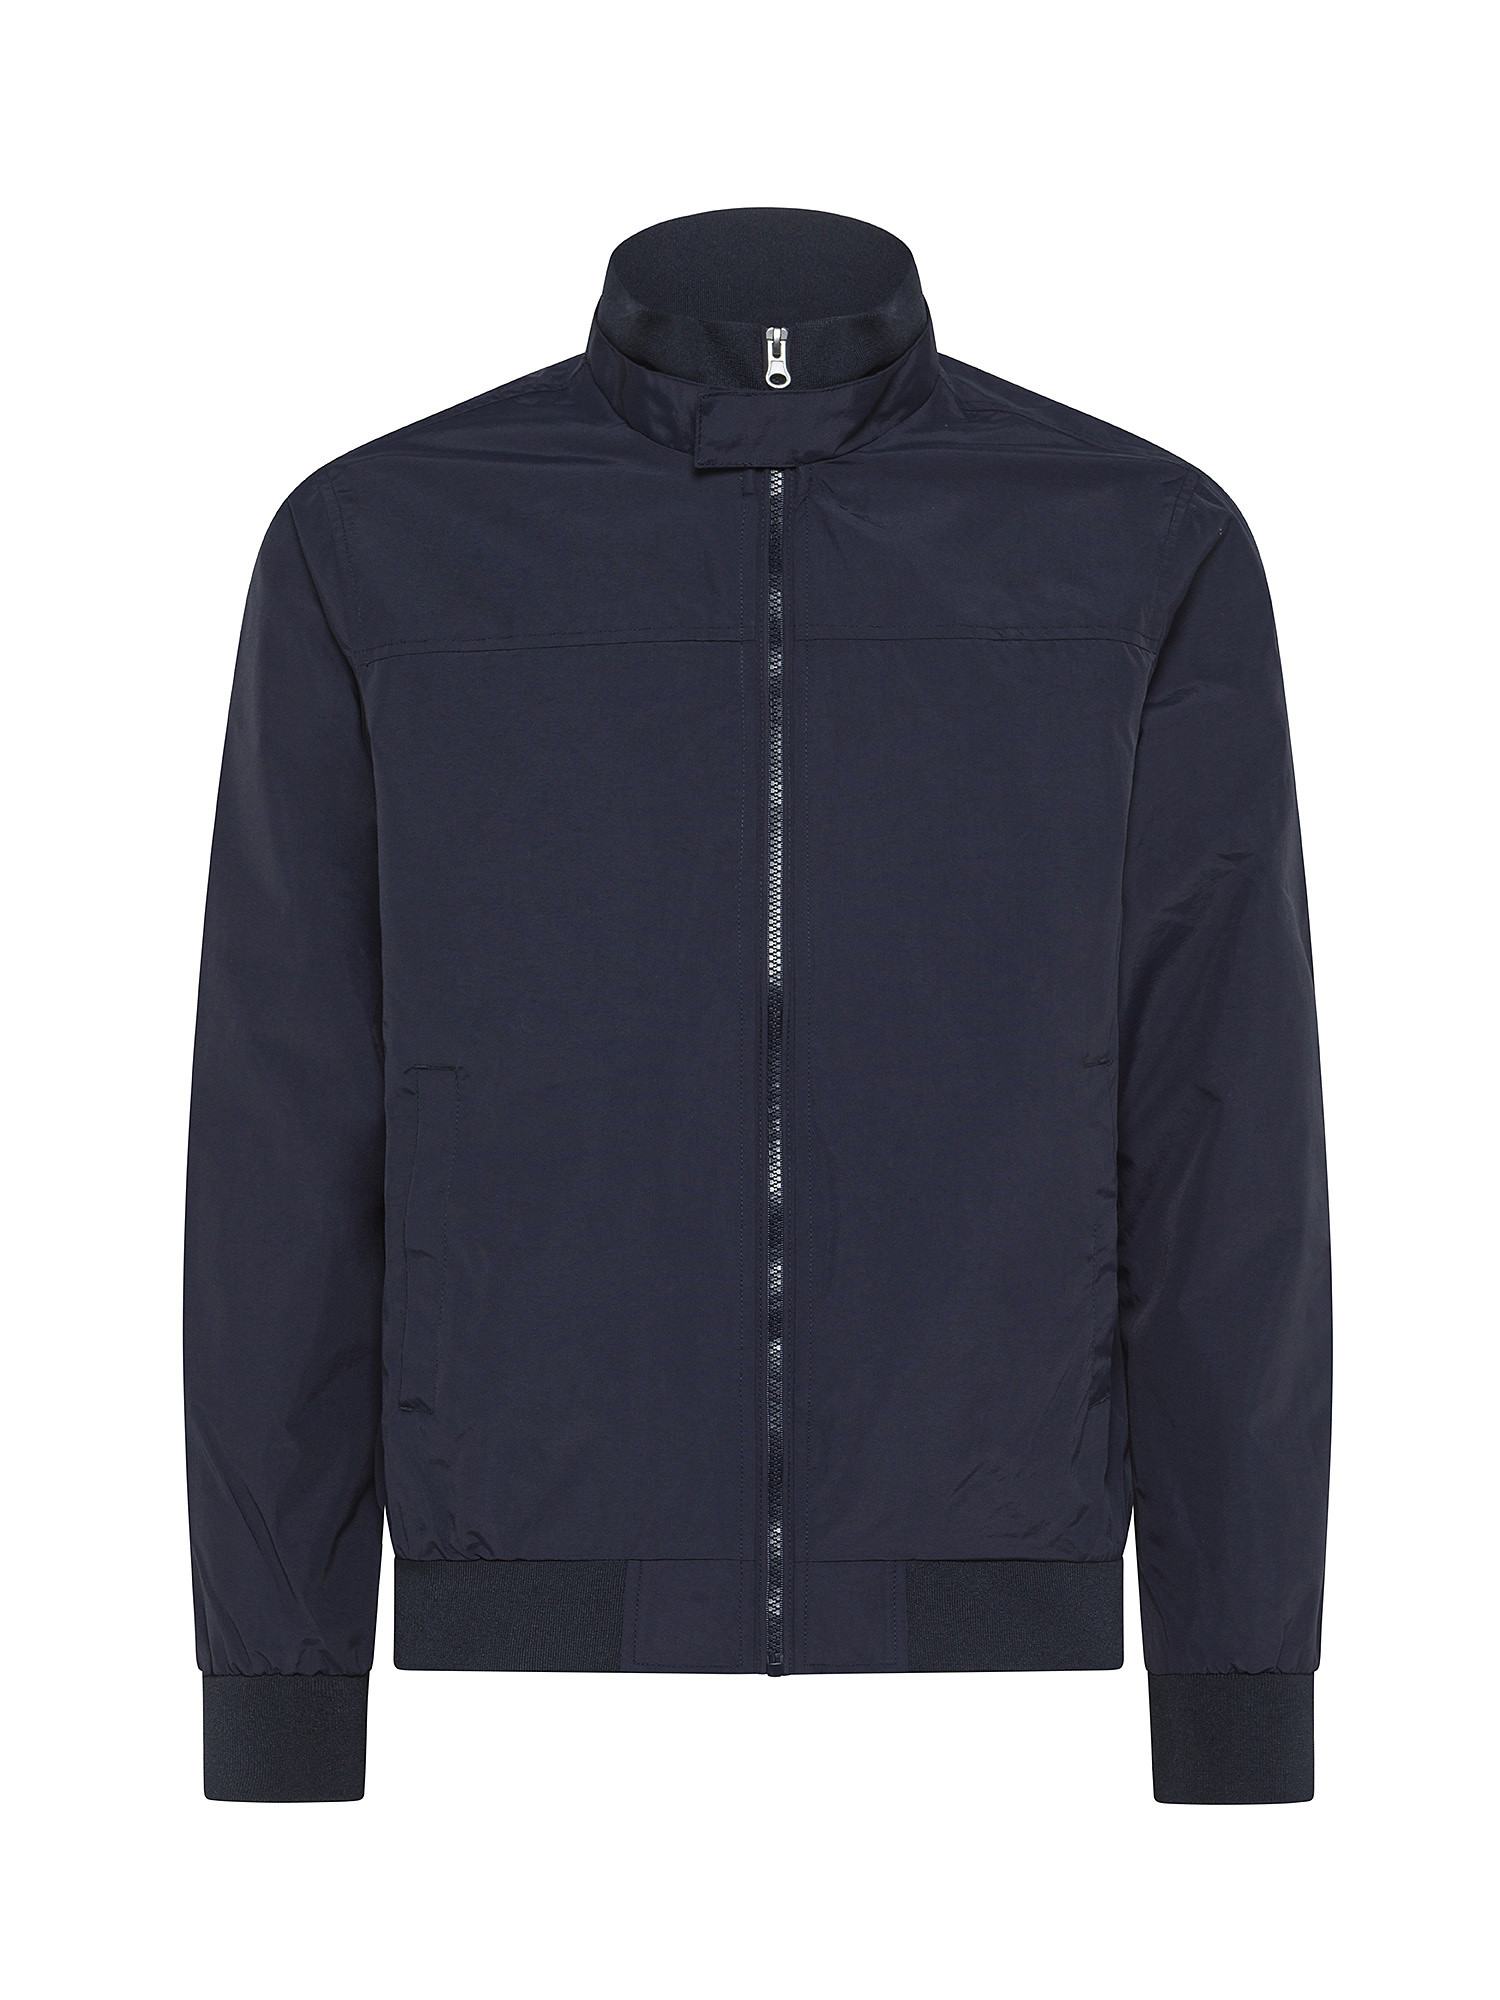 JCT - Giacca full zip, Blu scuro, large image number 0